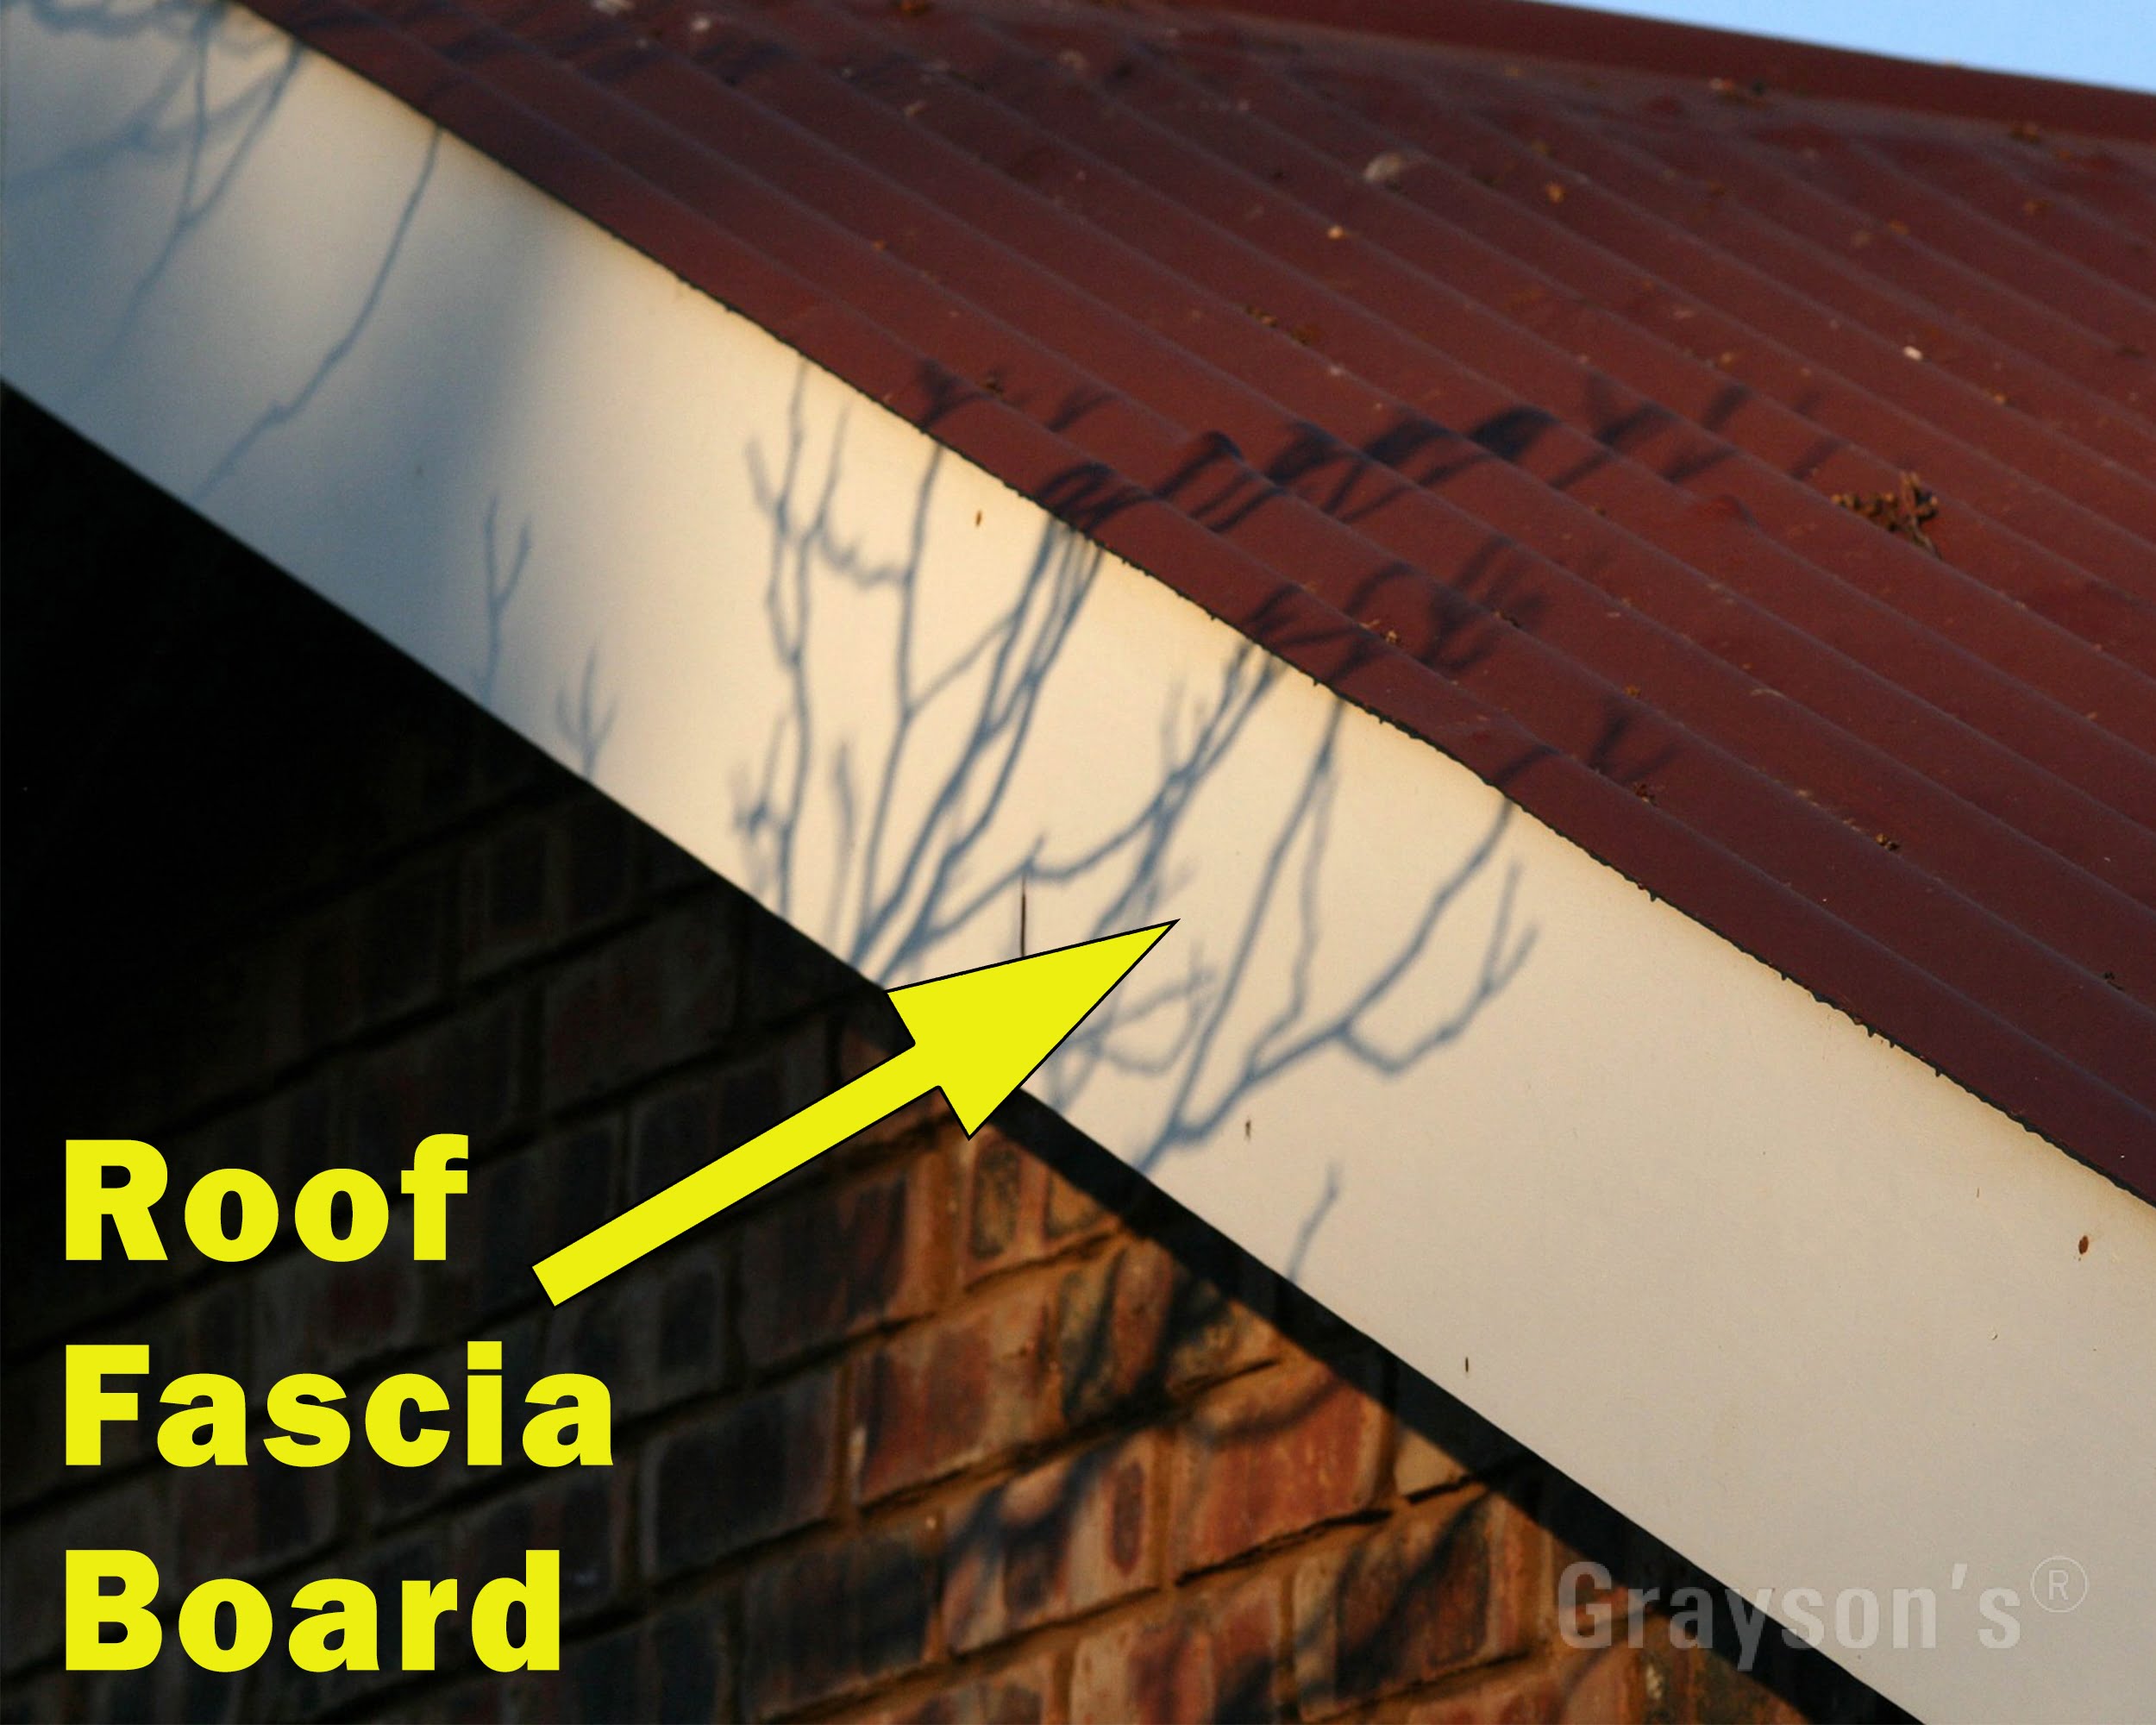 The fascia of a gable roof